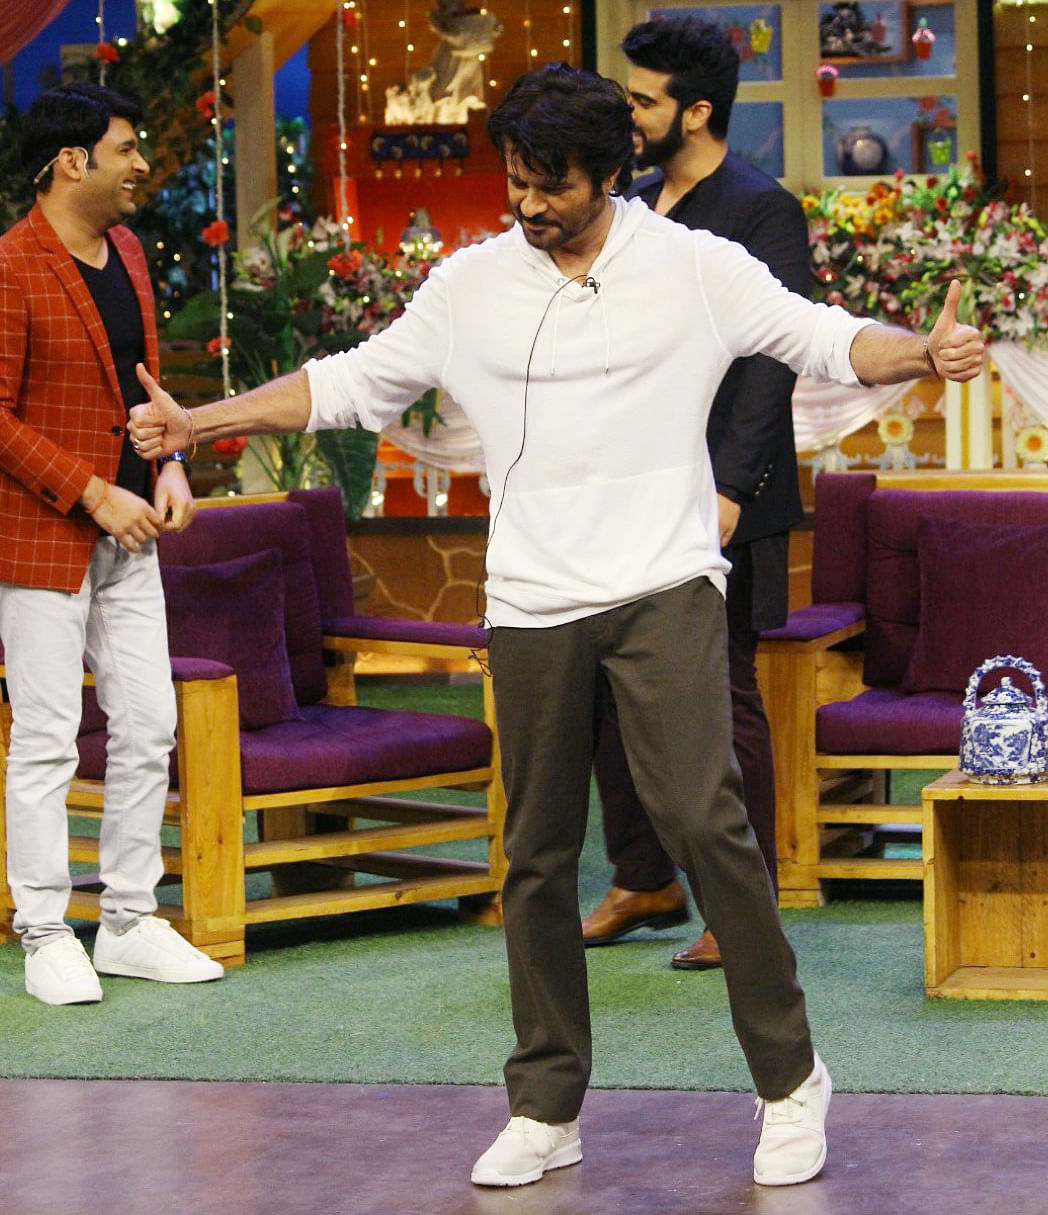  ‘Mubarakan’ stars Anil Kapoor and Arjun Kapoor were spotted on The Kapil Sharma Show. Here’s what they were up to.